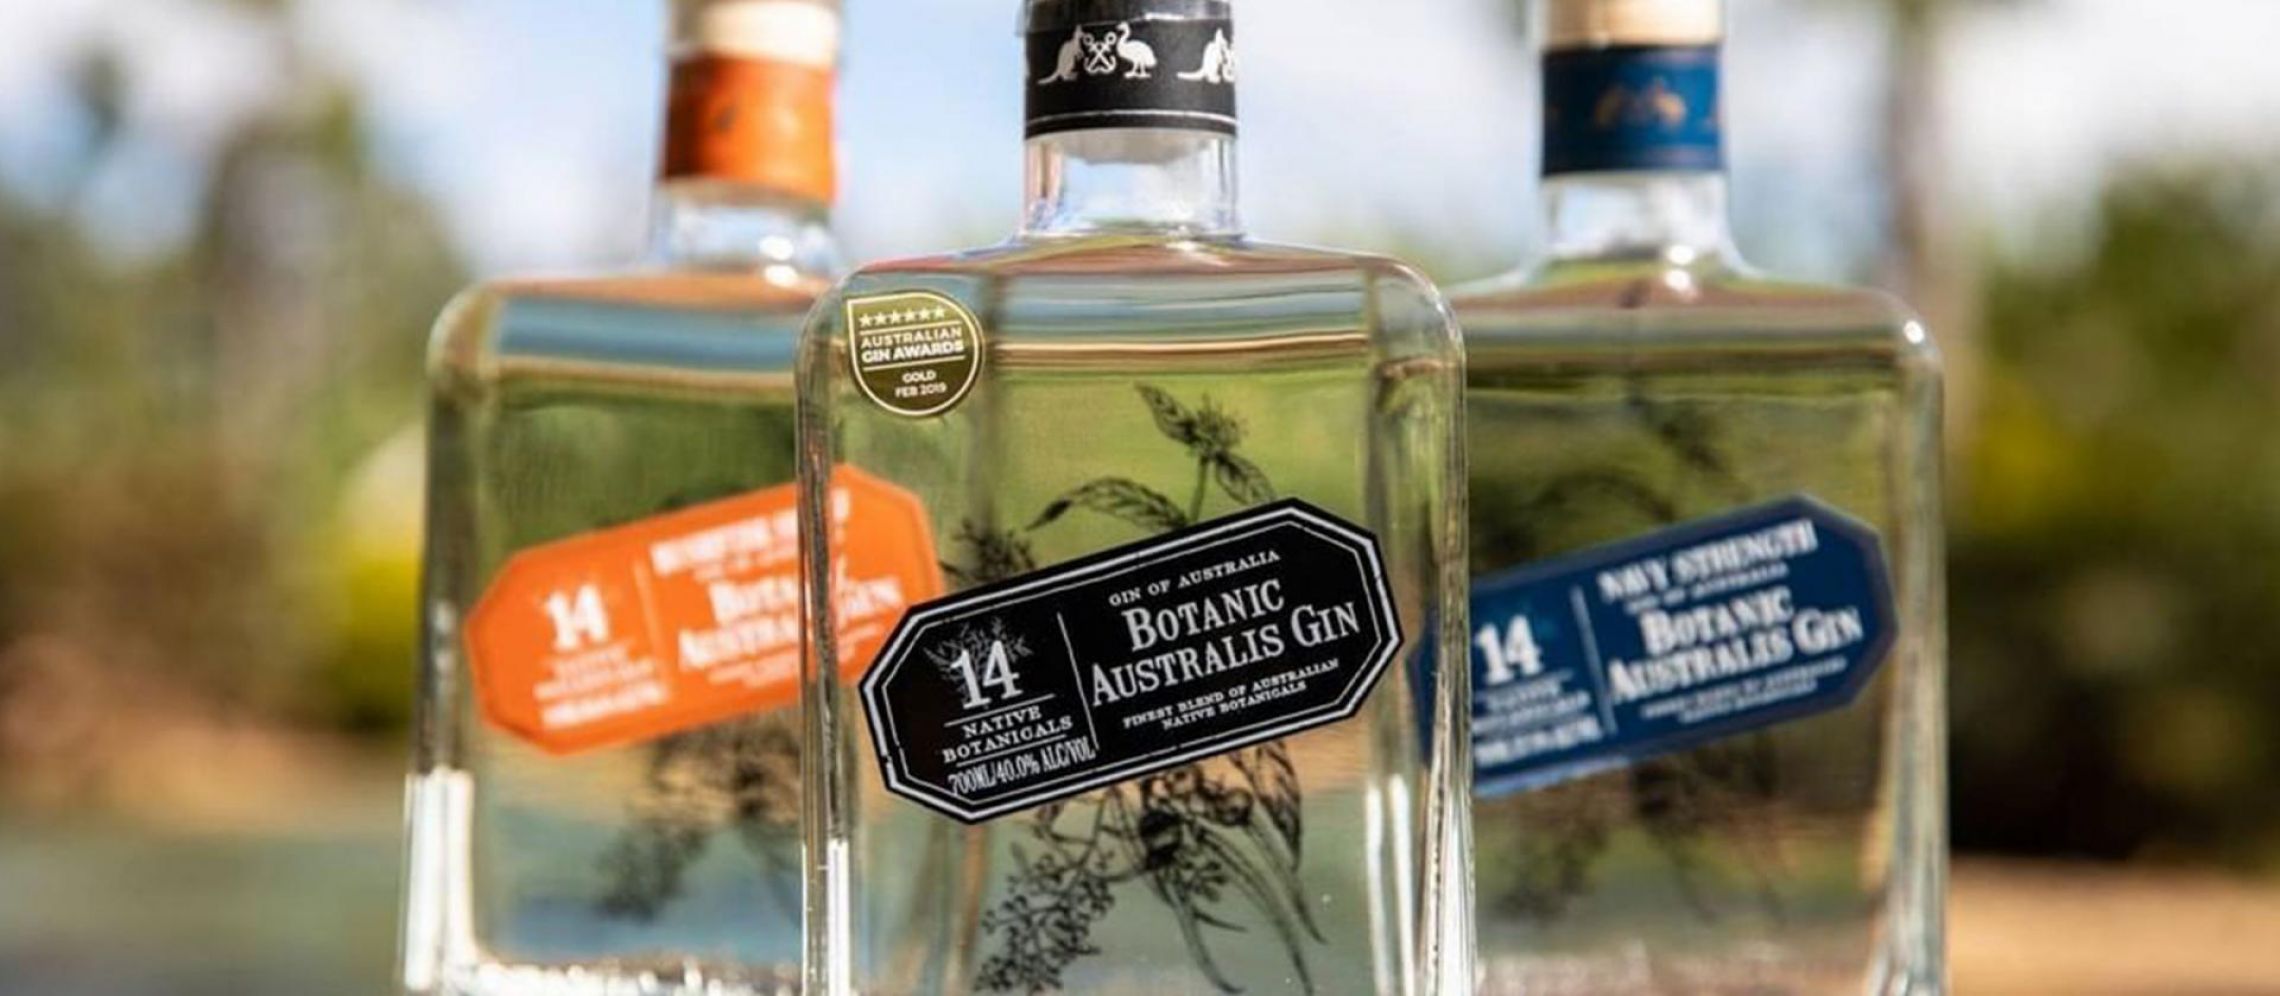 Photo for: The Australian Gin Market Is Soaring!